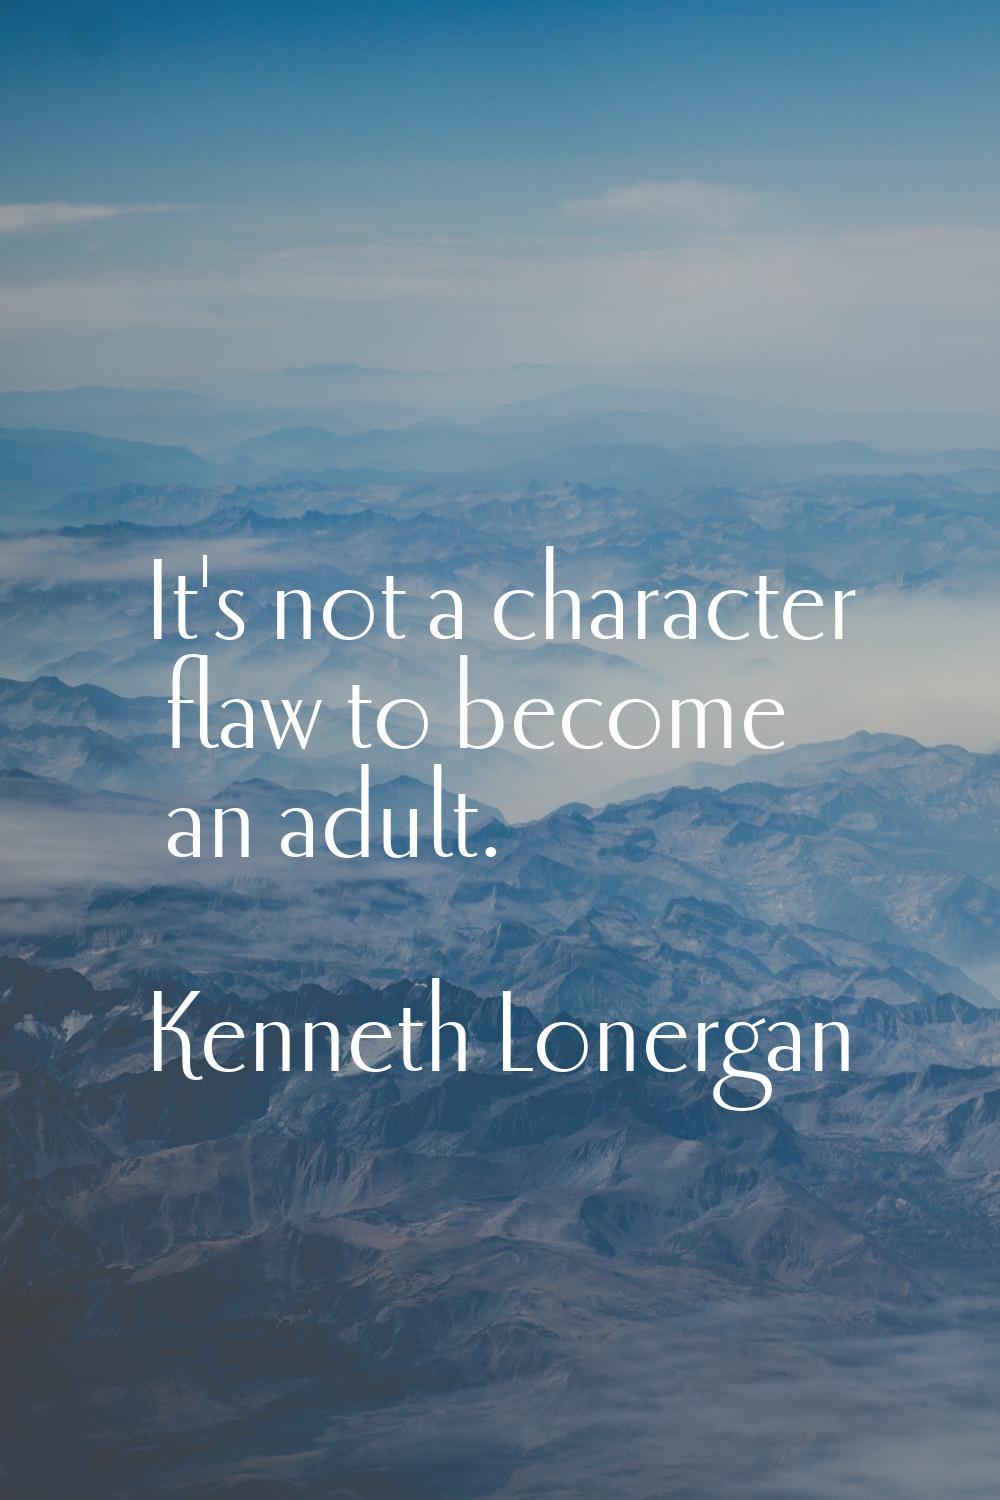 It's not a character flaw to become an adult.